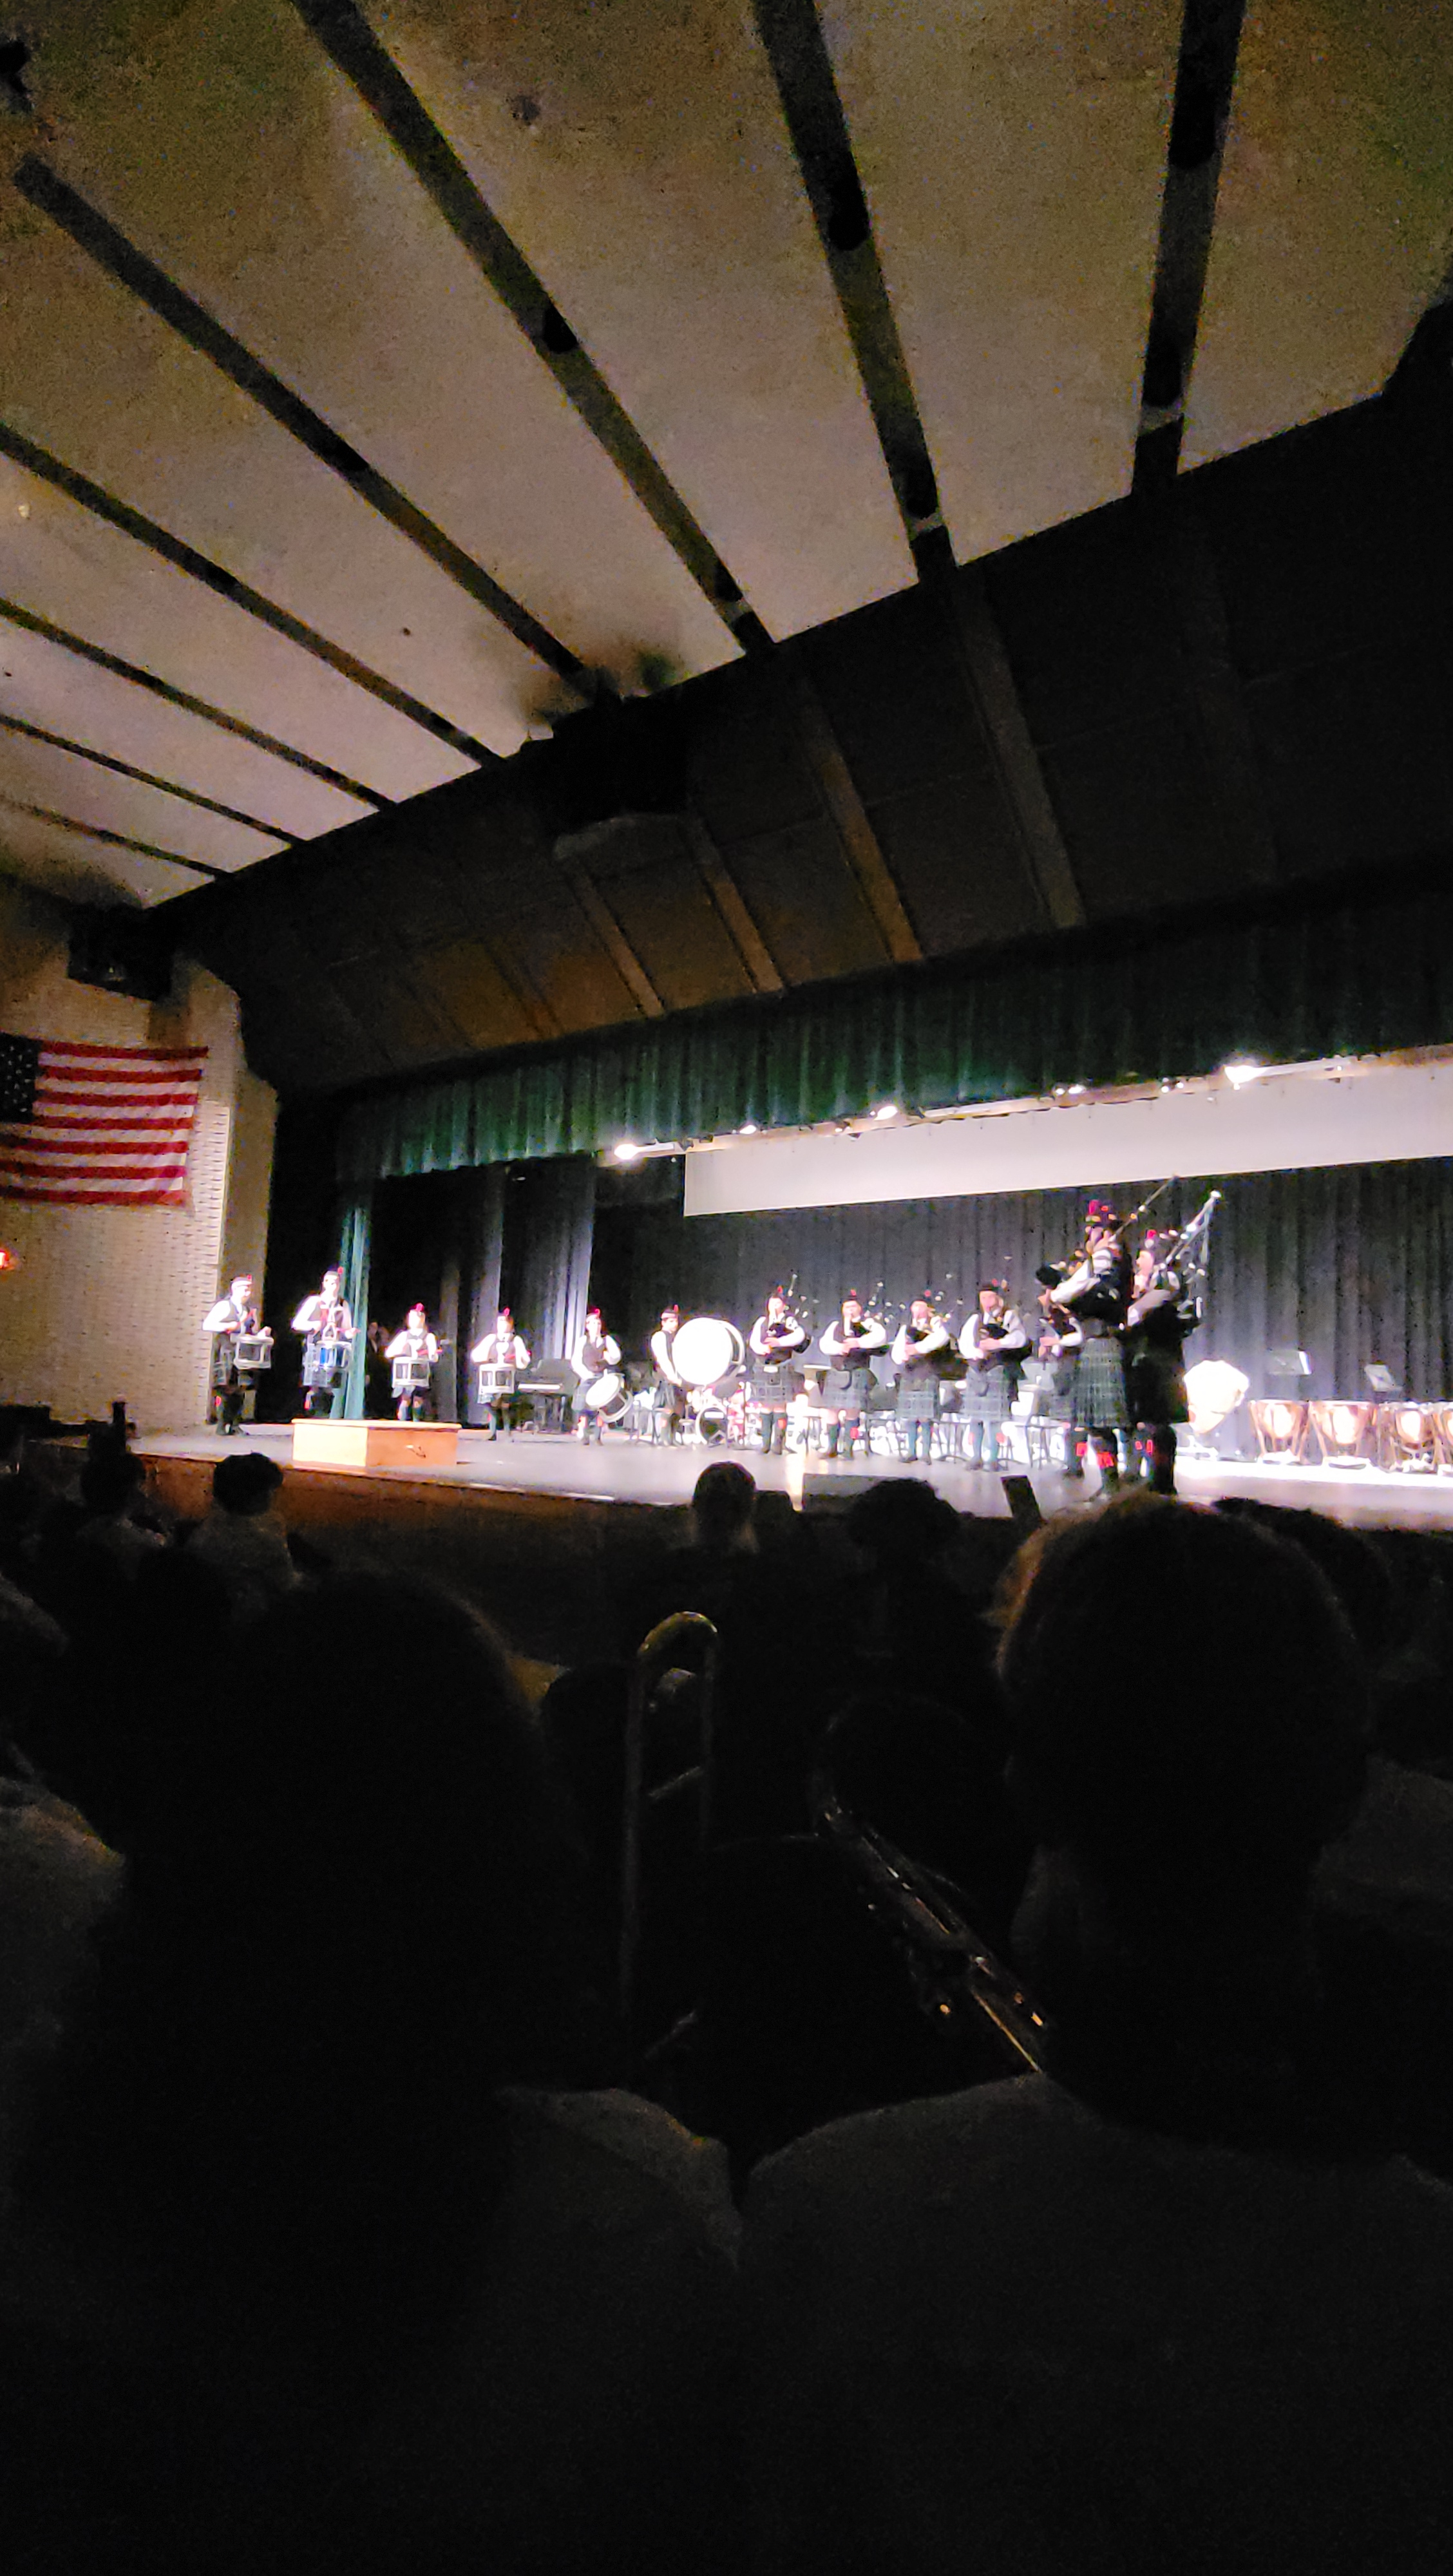 PJHS Bagpipe Class Performance